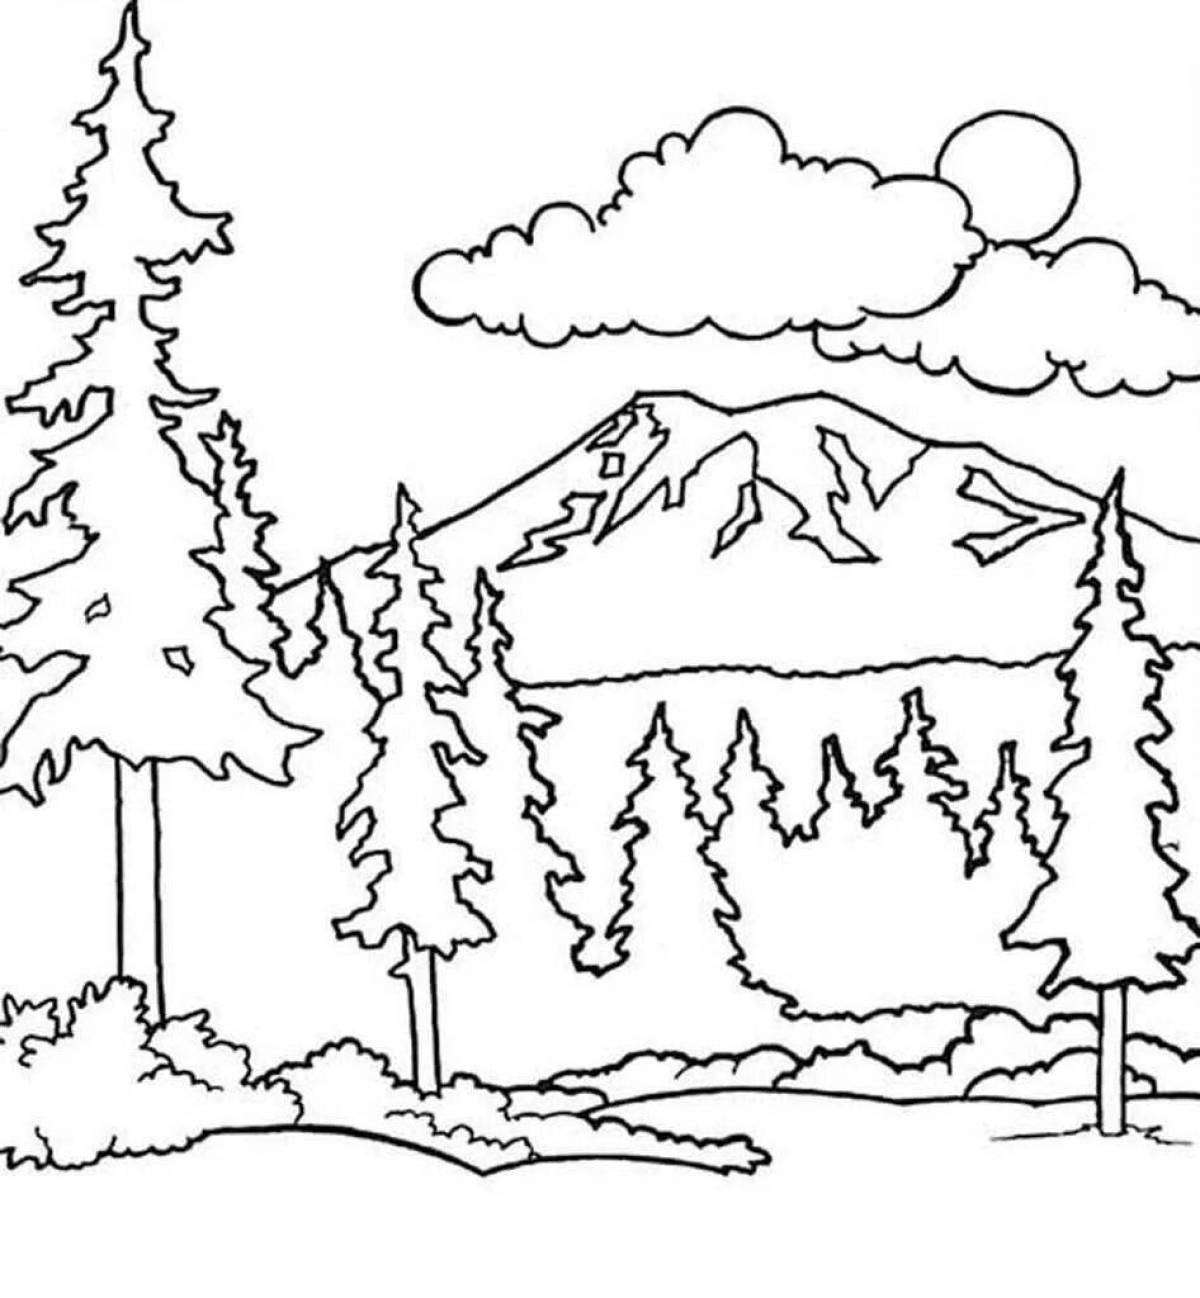 Coloring page magical pine forest